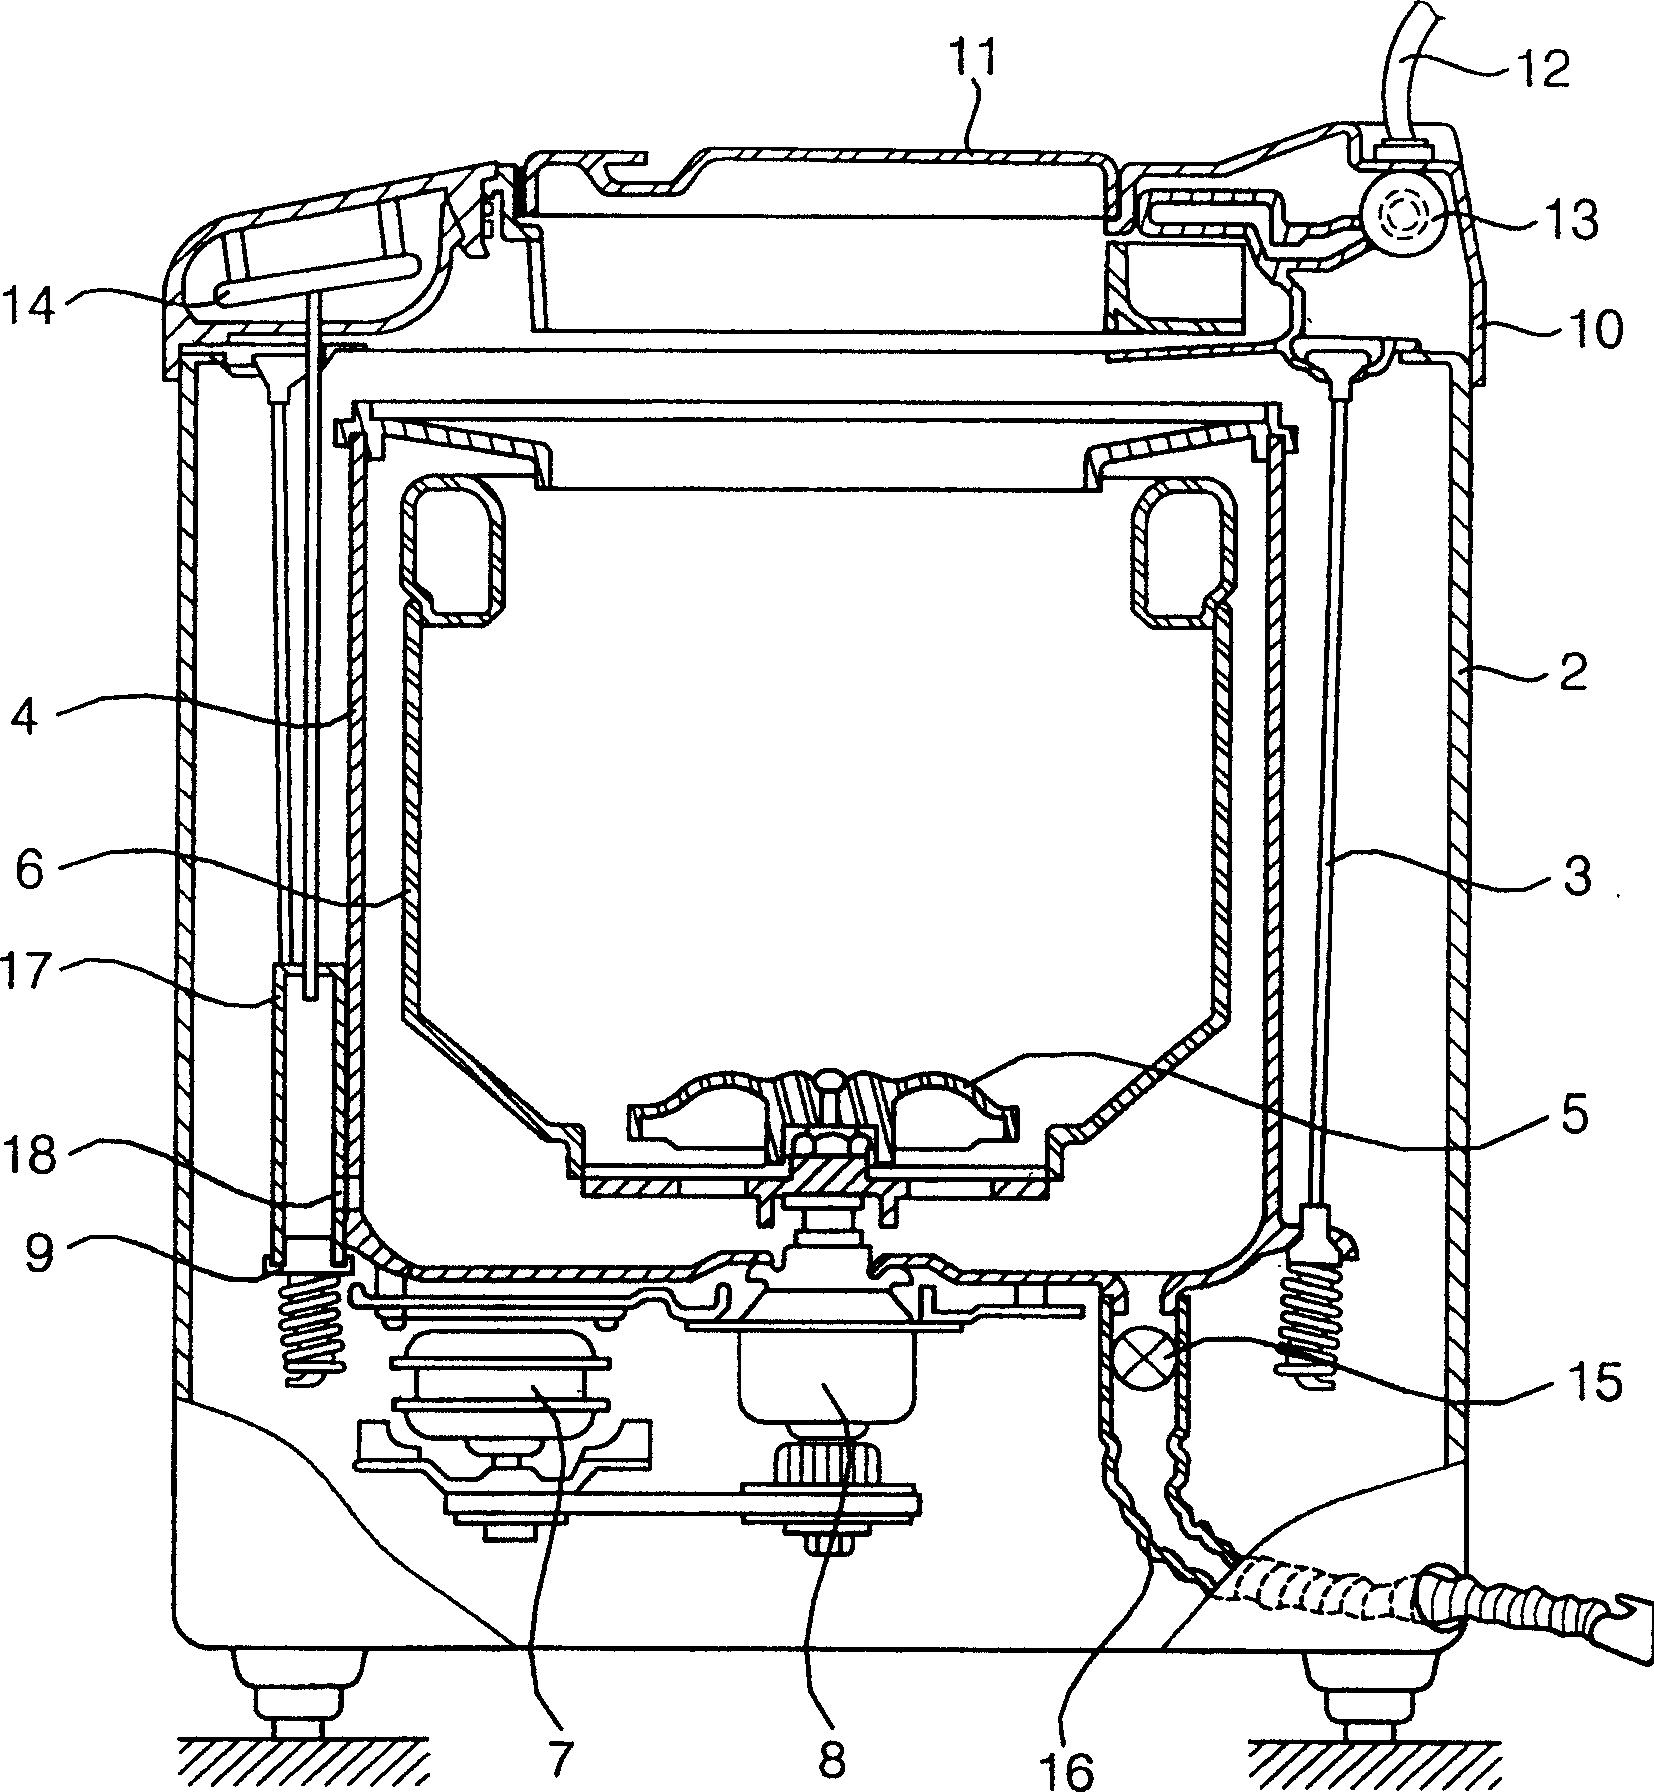 Structure of water quality sensor of washing machine